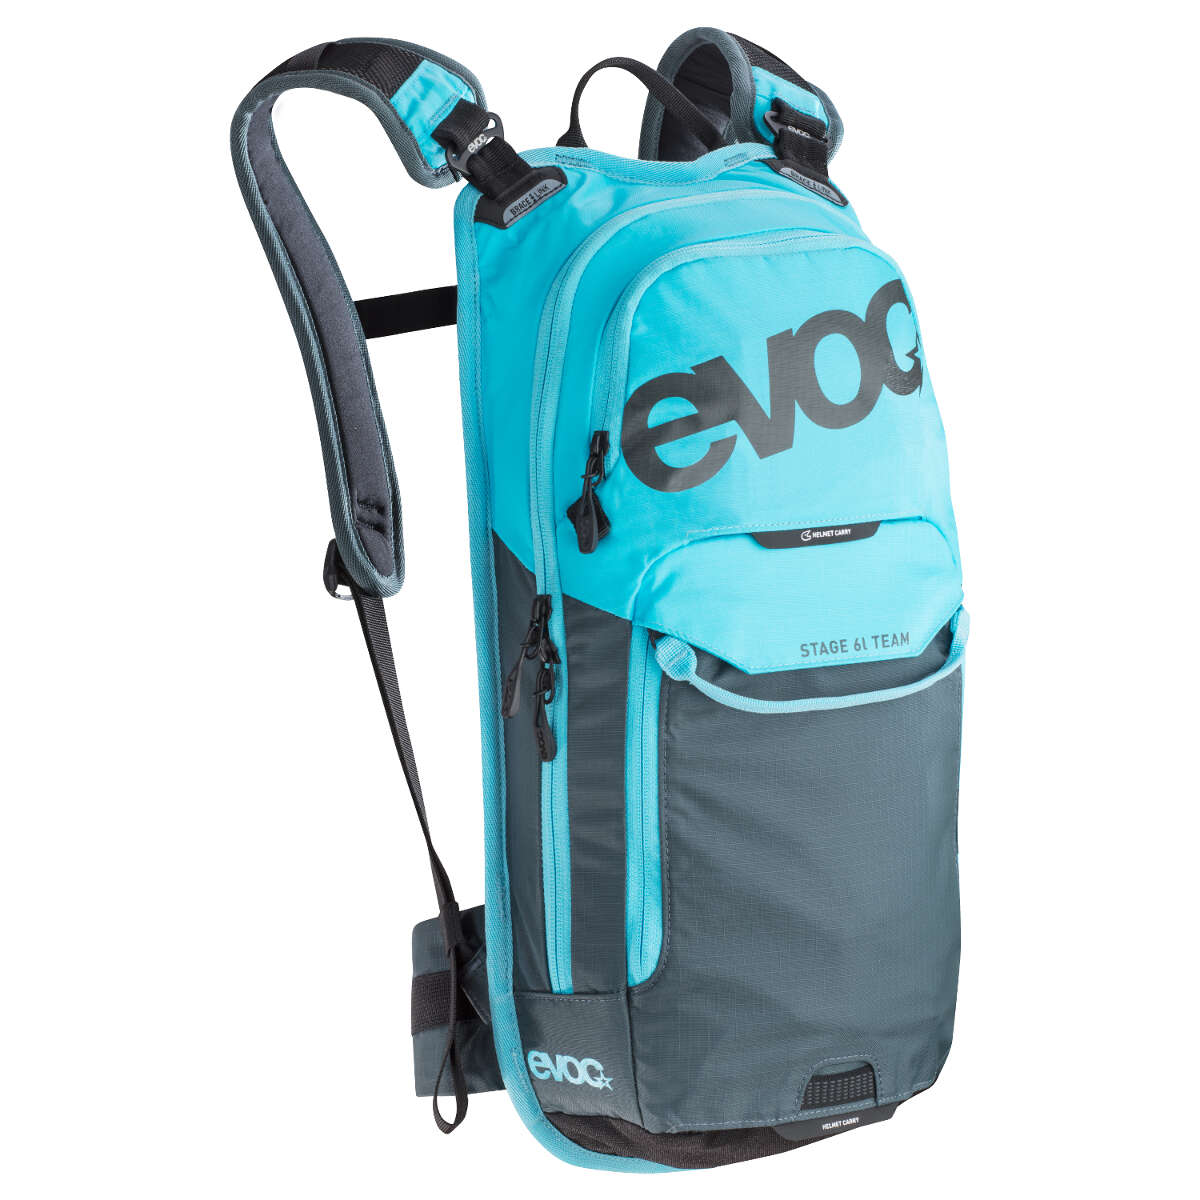 Evoc Backpack with Hydration System Compartment Stage Team Neon Blue-Slate, 6 Liter